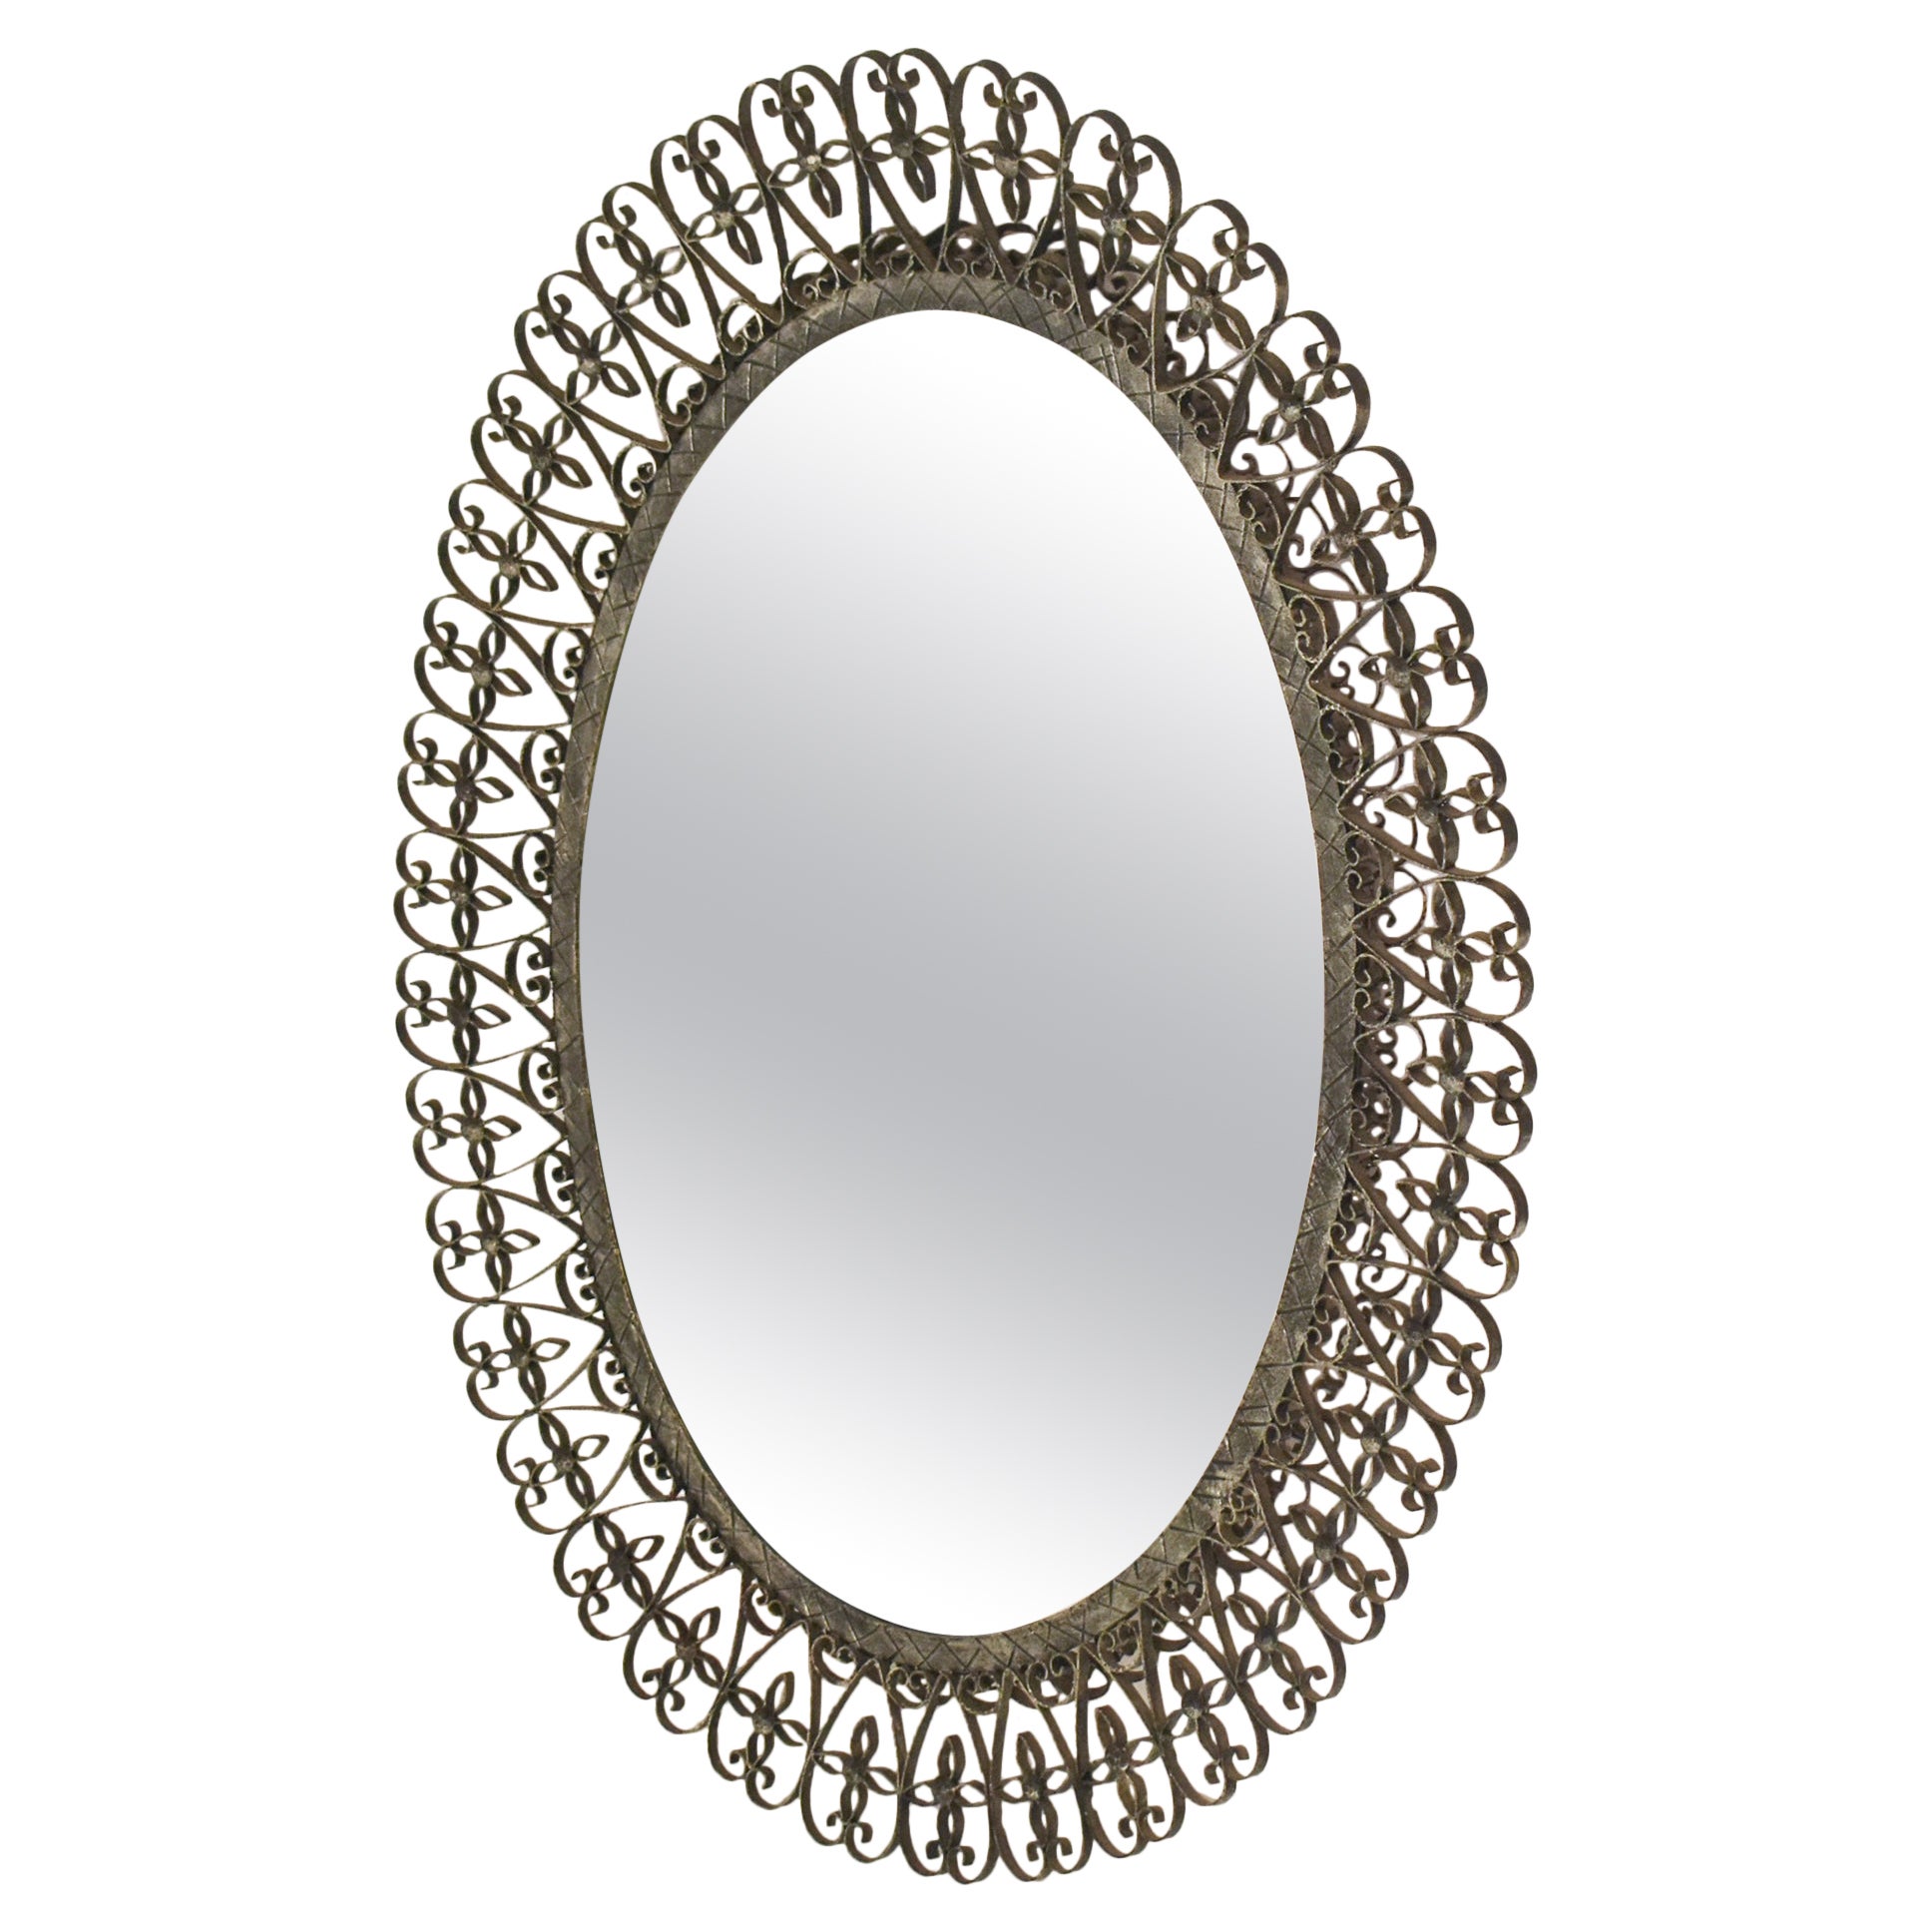 Oval mirror, wrought iron. Spain 1970's Patinated in aged silver color.